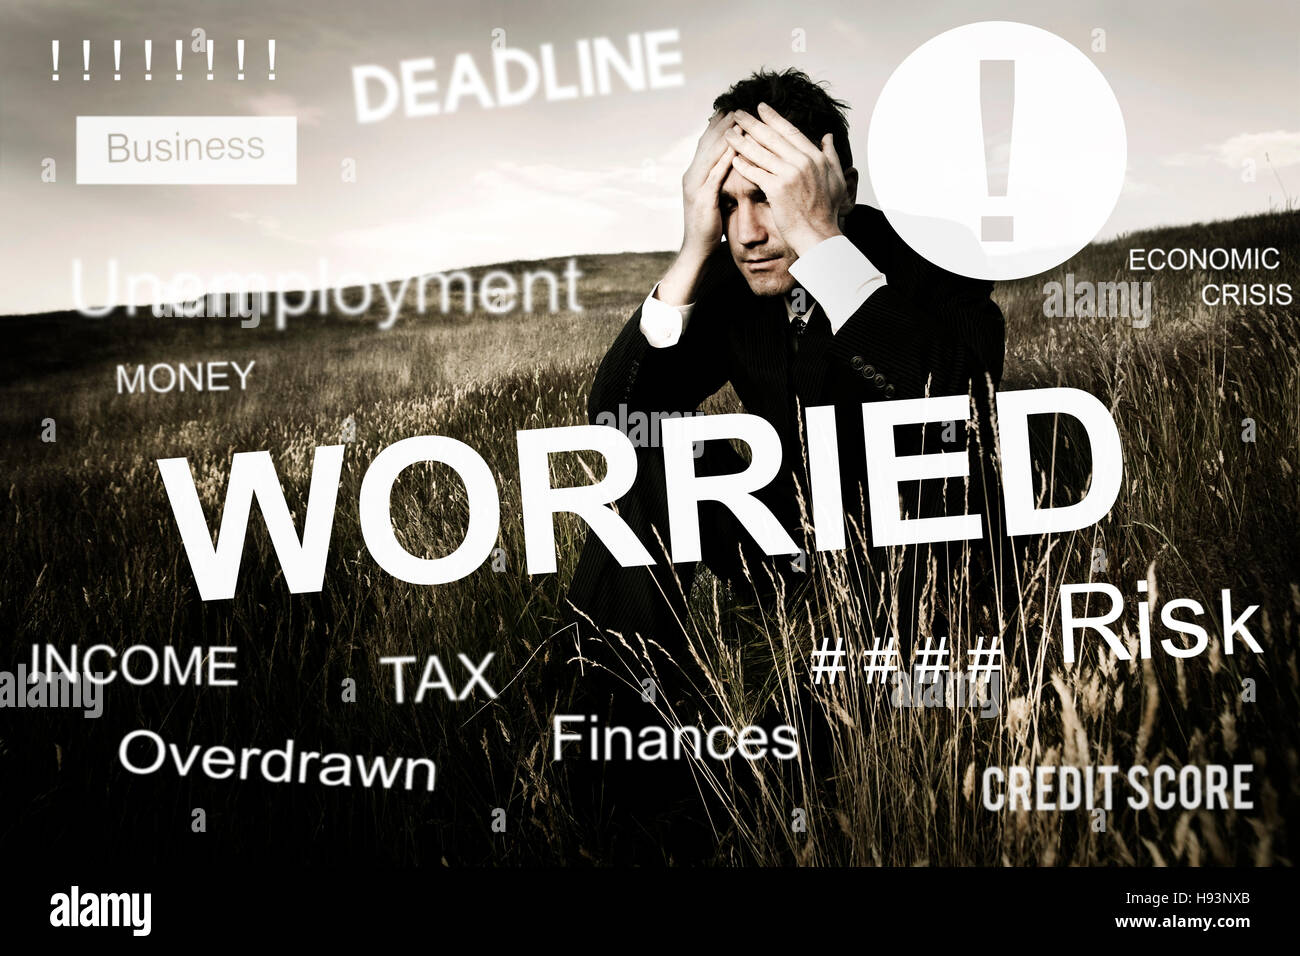 Business Problem Concern Worried Graphic Concept Stock Photo